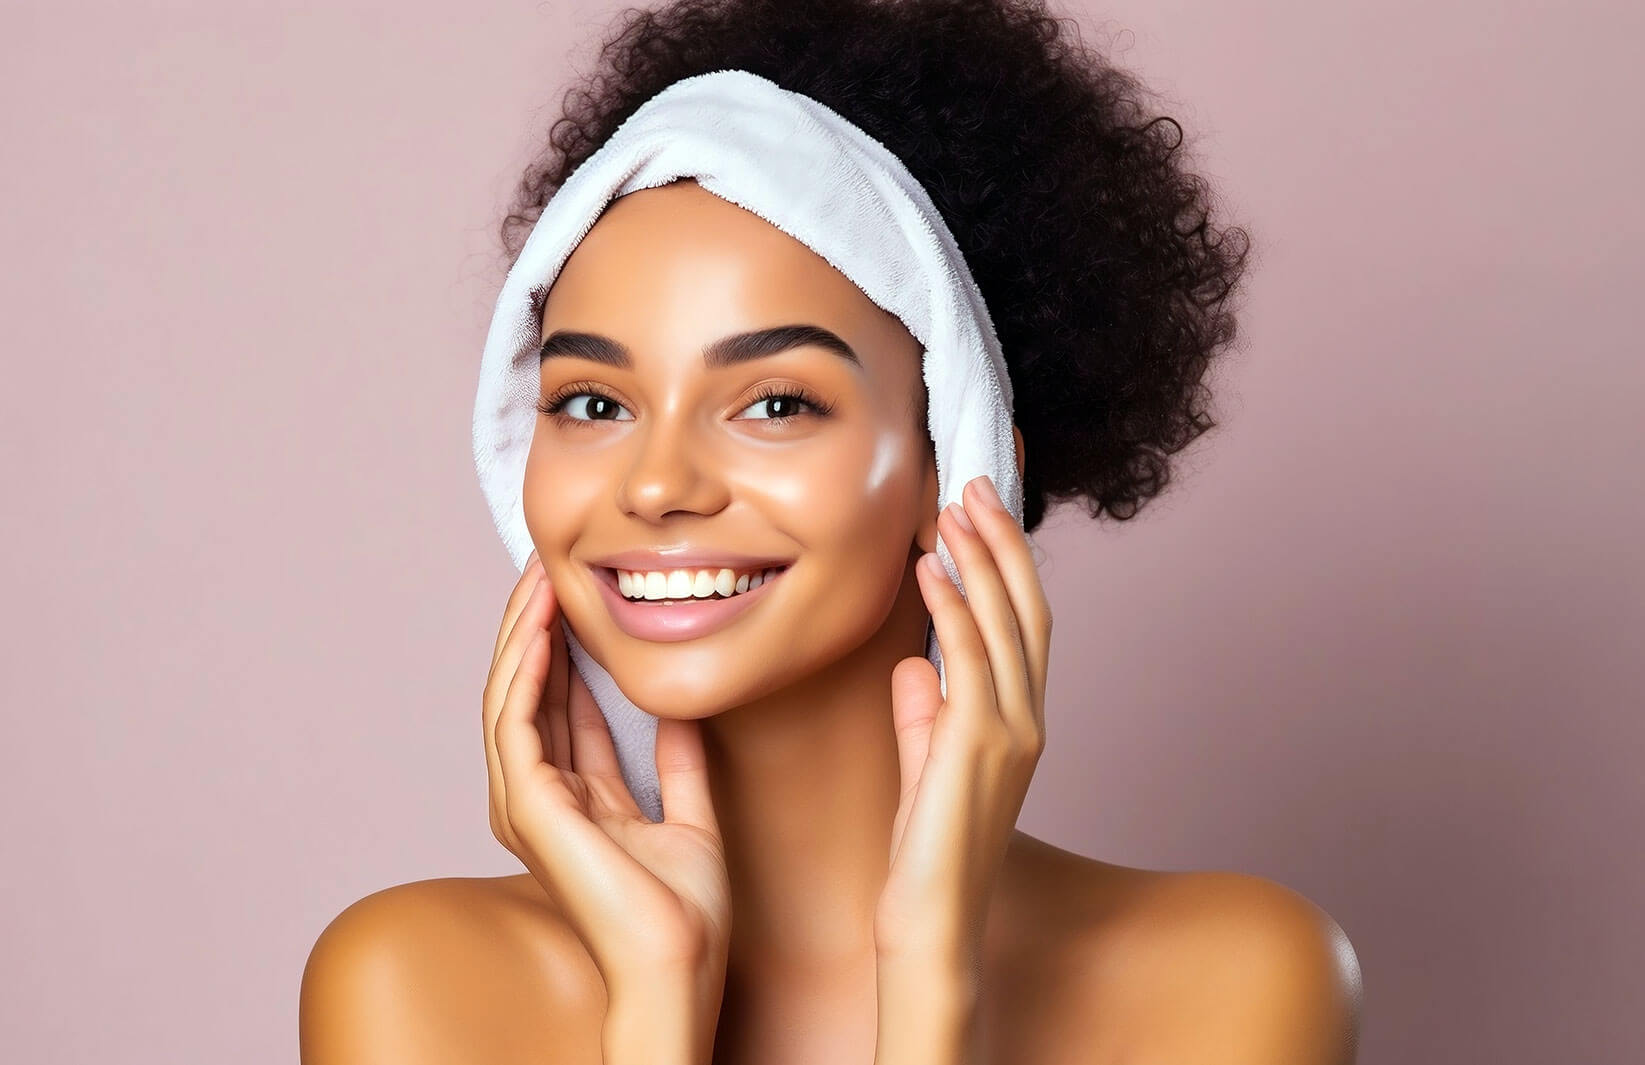 Top 5 Cleansers for Dry Skin. Portrait of woman with curly hair with white towel on head after moisturizing skin, fresh skin beauty skincare shot